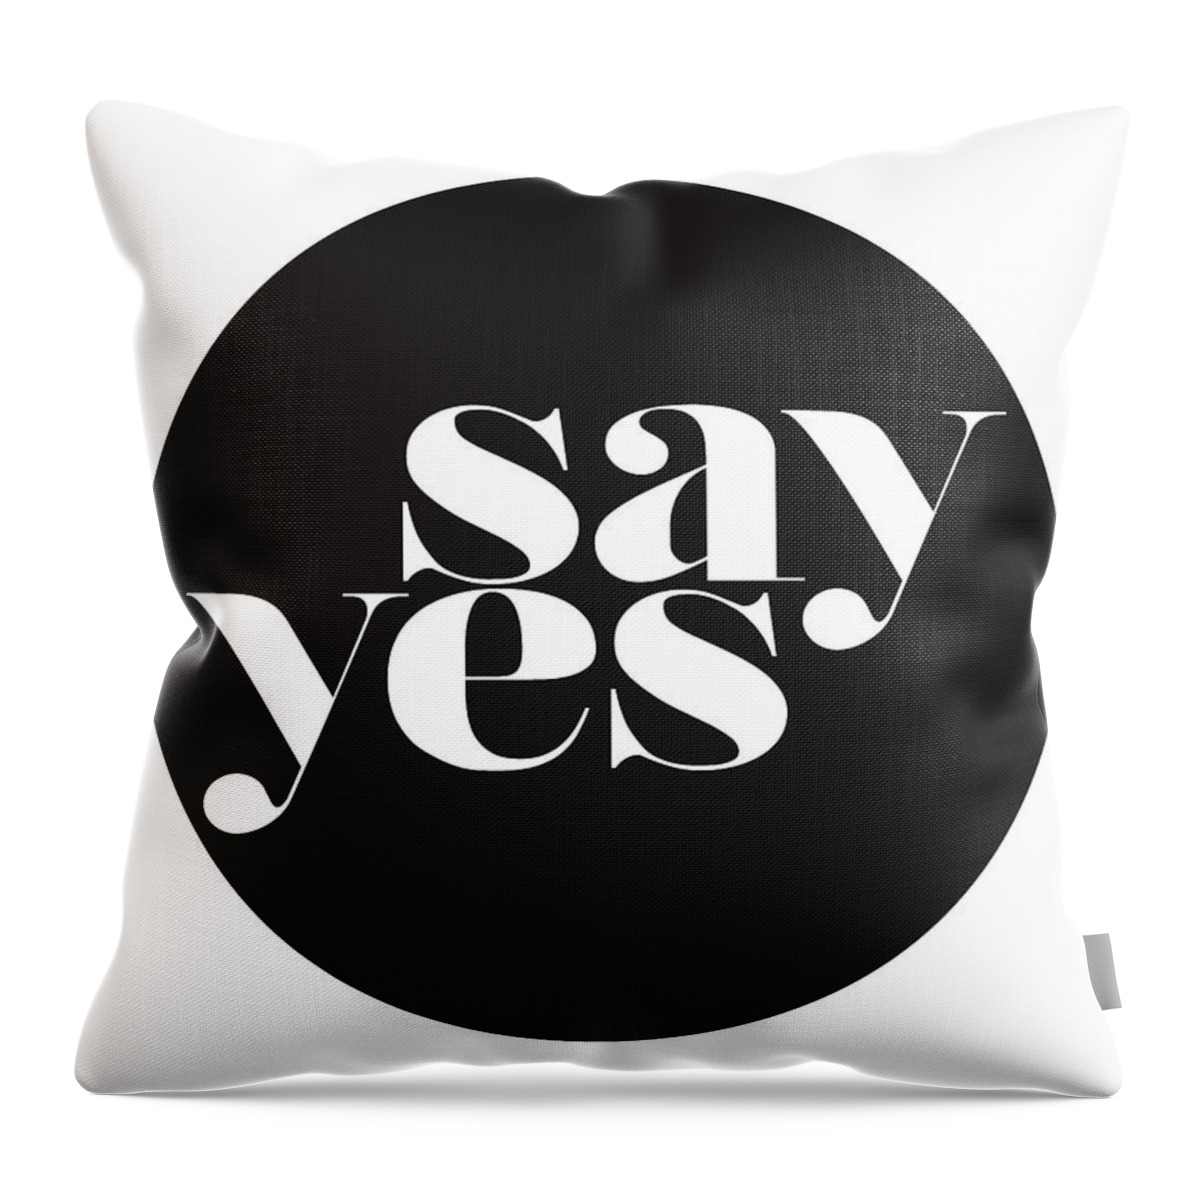 Say Yes Throw Pillow featuring the mixed media Say Yes by Studio Grafiikka